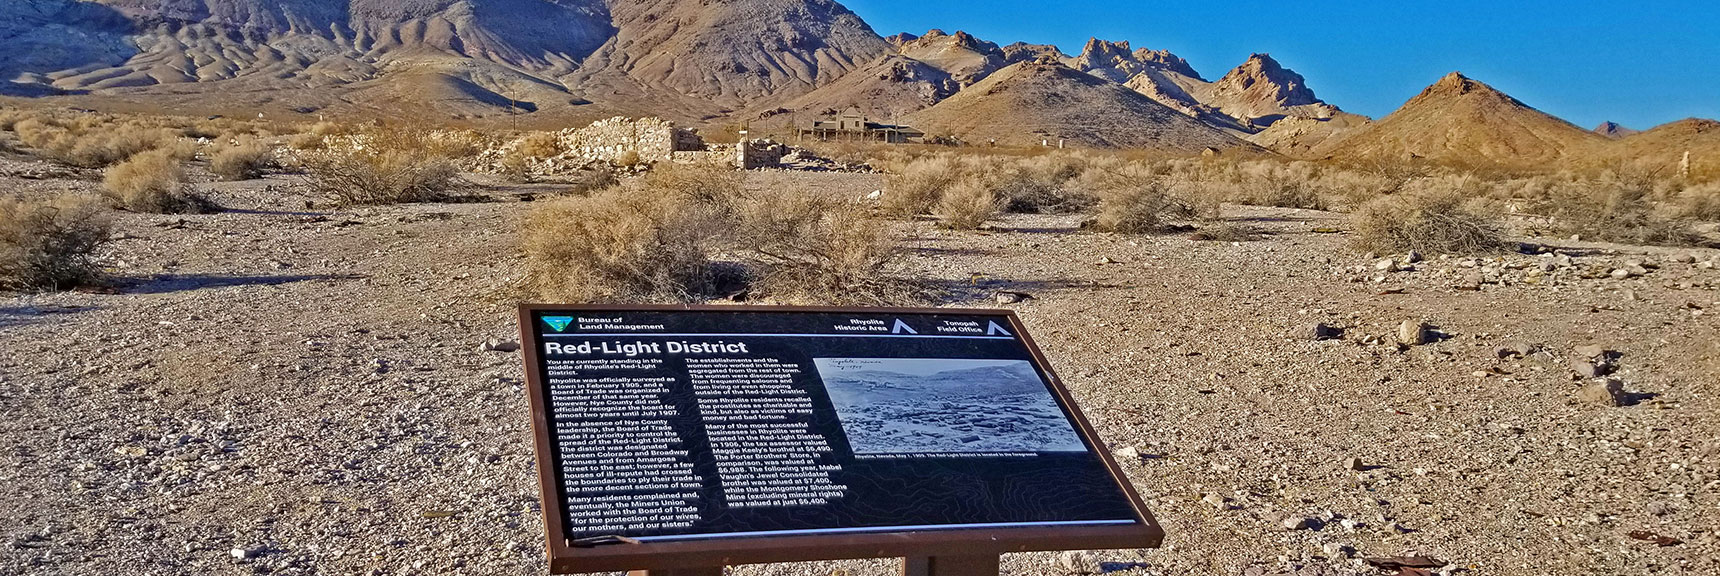 Note How Close Everything is -- Red Light District Just 100 Yards from Train Depot | Rhyolite Ghost Town | Death Valley Area, Nevada